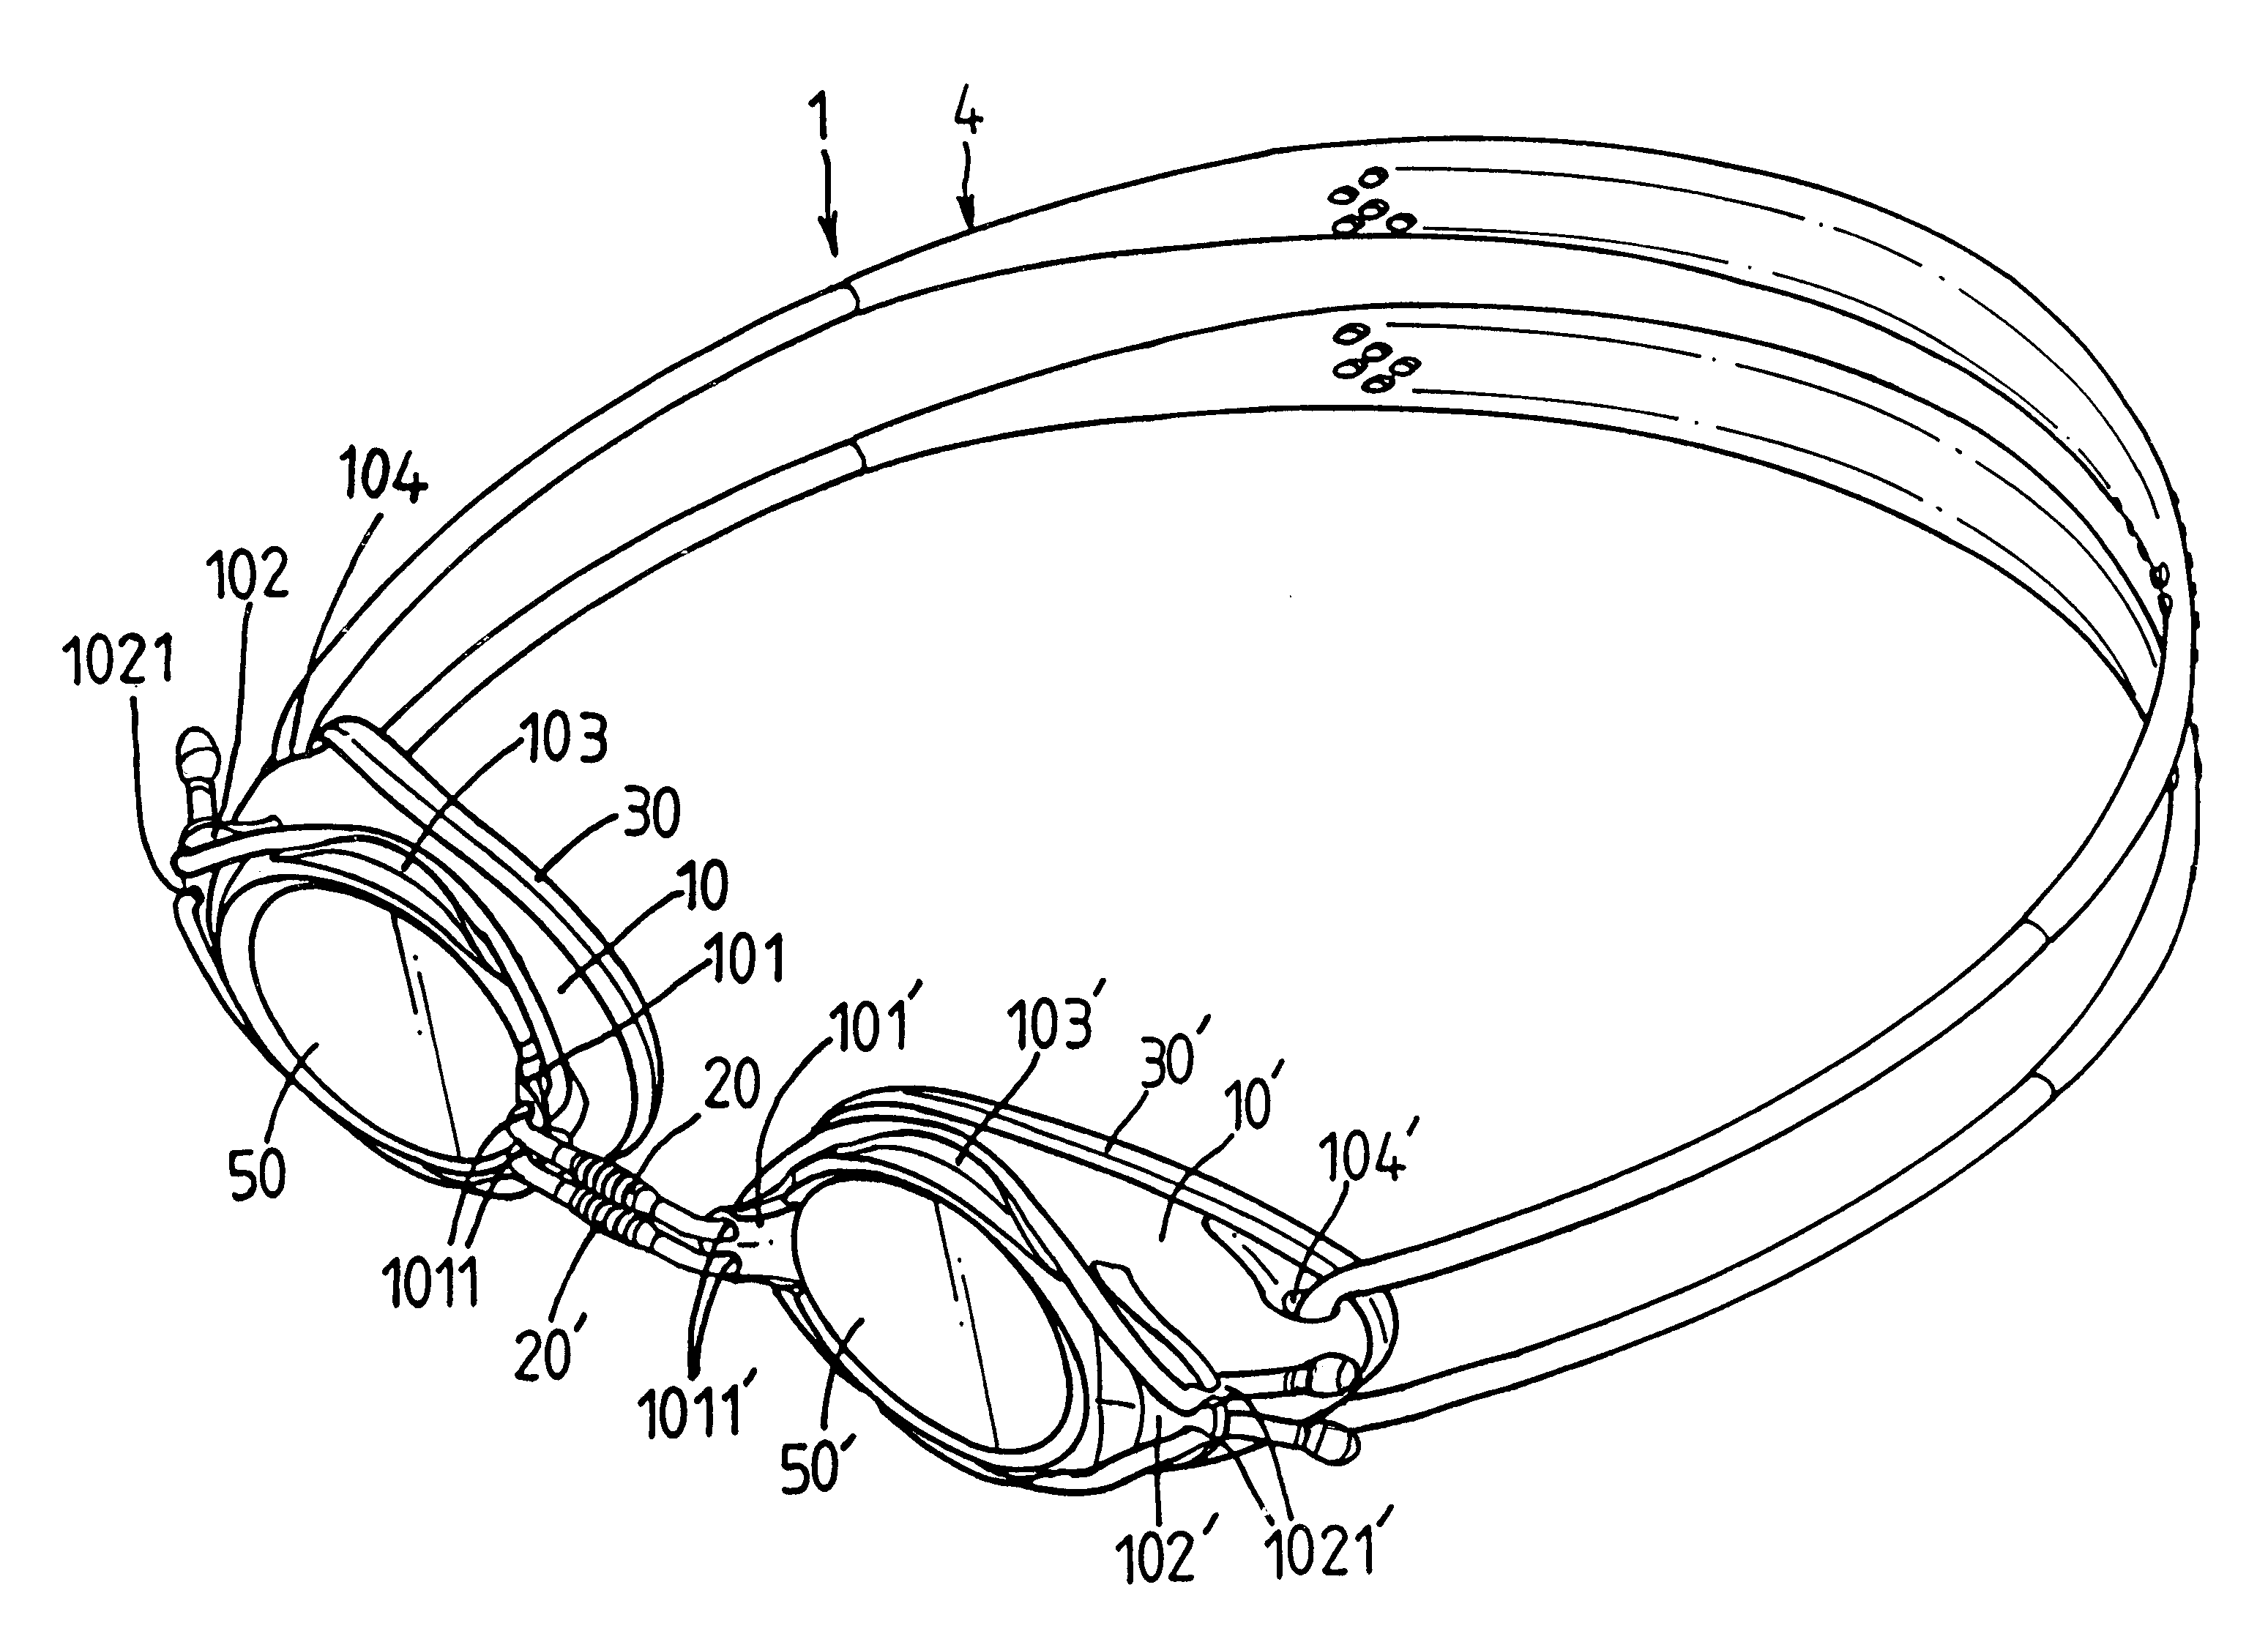 Swimming goggles with step-less adjustment